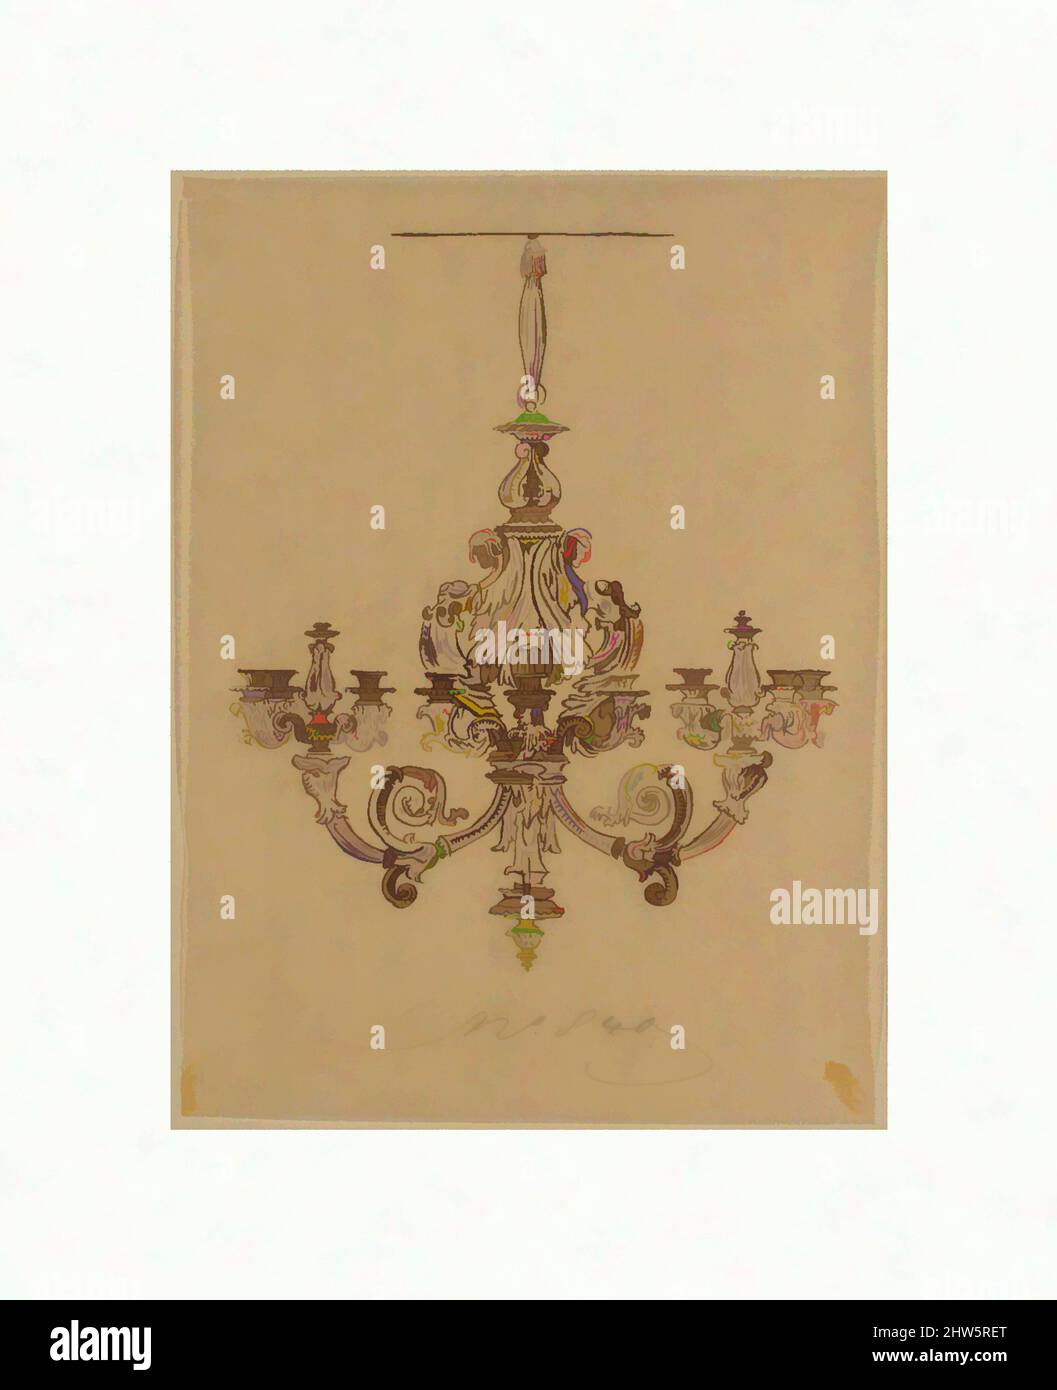 Art inspired by Design for a Chandelier, 19th century, Pen and brown ink, sheet: 8 3/8 x 6 9/16 in. (21.2 x 16.7 cm), Drawings, Anonymous, French, 19th century, Classic works modernized by Artotop with a splash of modernity. Shapes, color and value, eye-catching visual impact on art. Emotions through freedom of artworks in a contemporary way. A timeless message pursuing a wildly creative new direction. Artists turning to the digital medium and creating the Artotop NFT Stock Photo